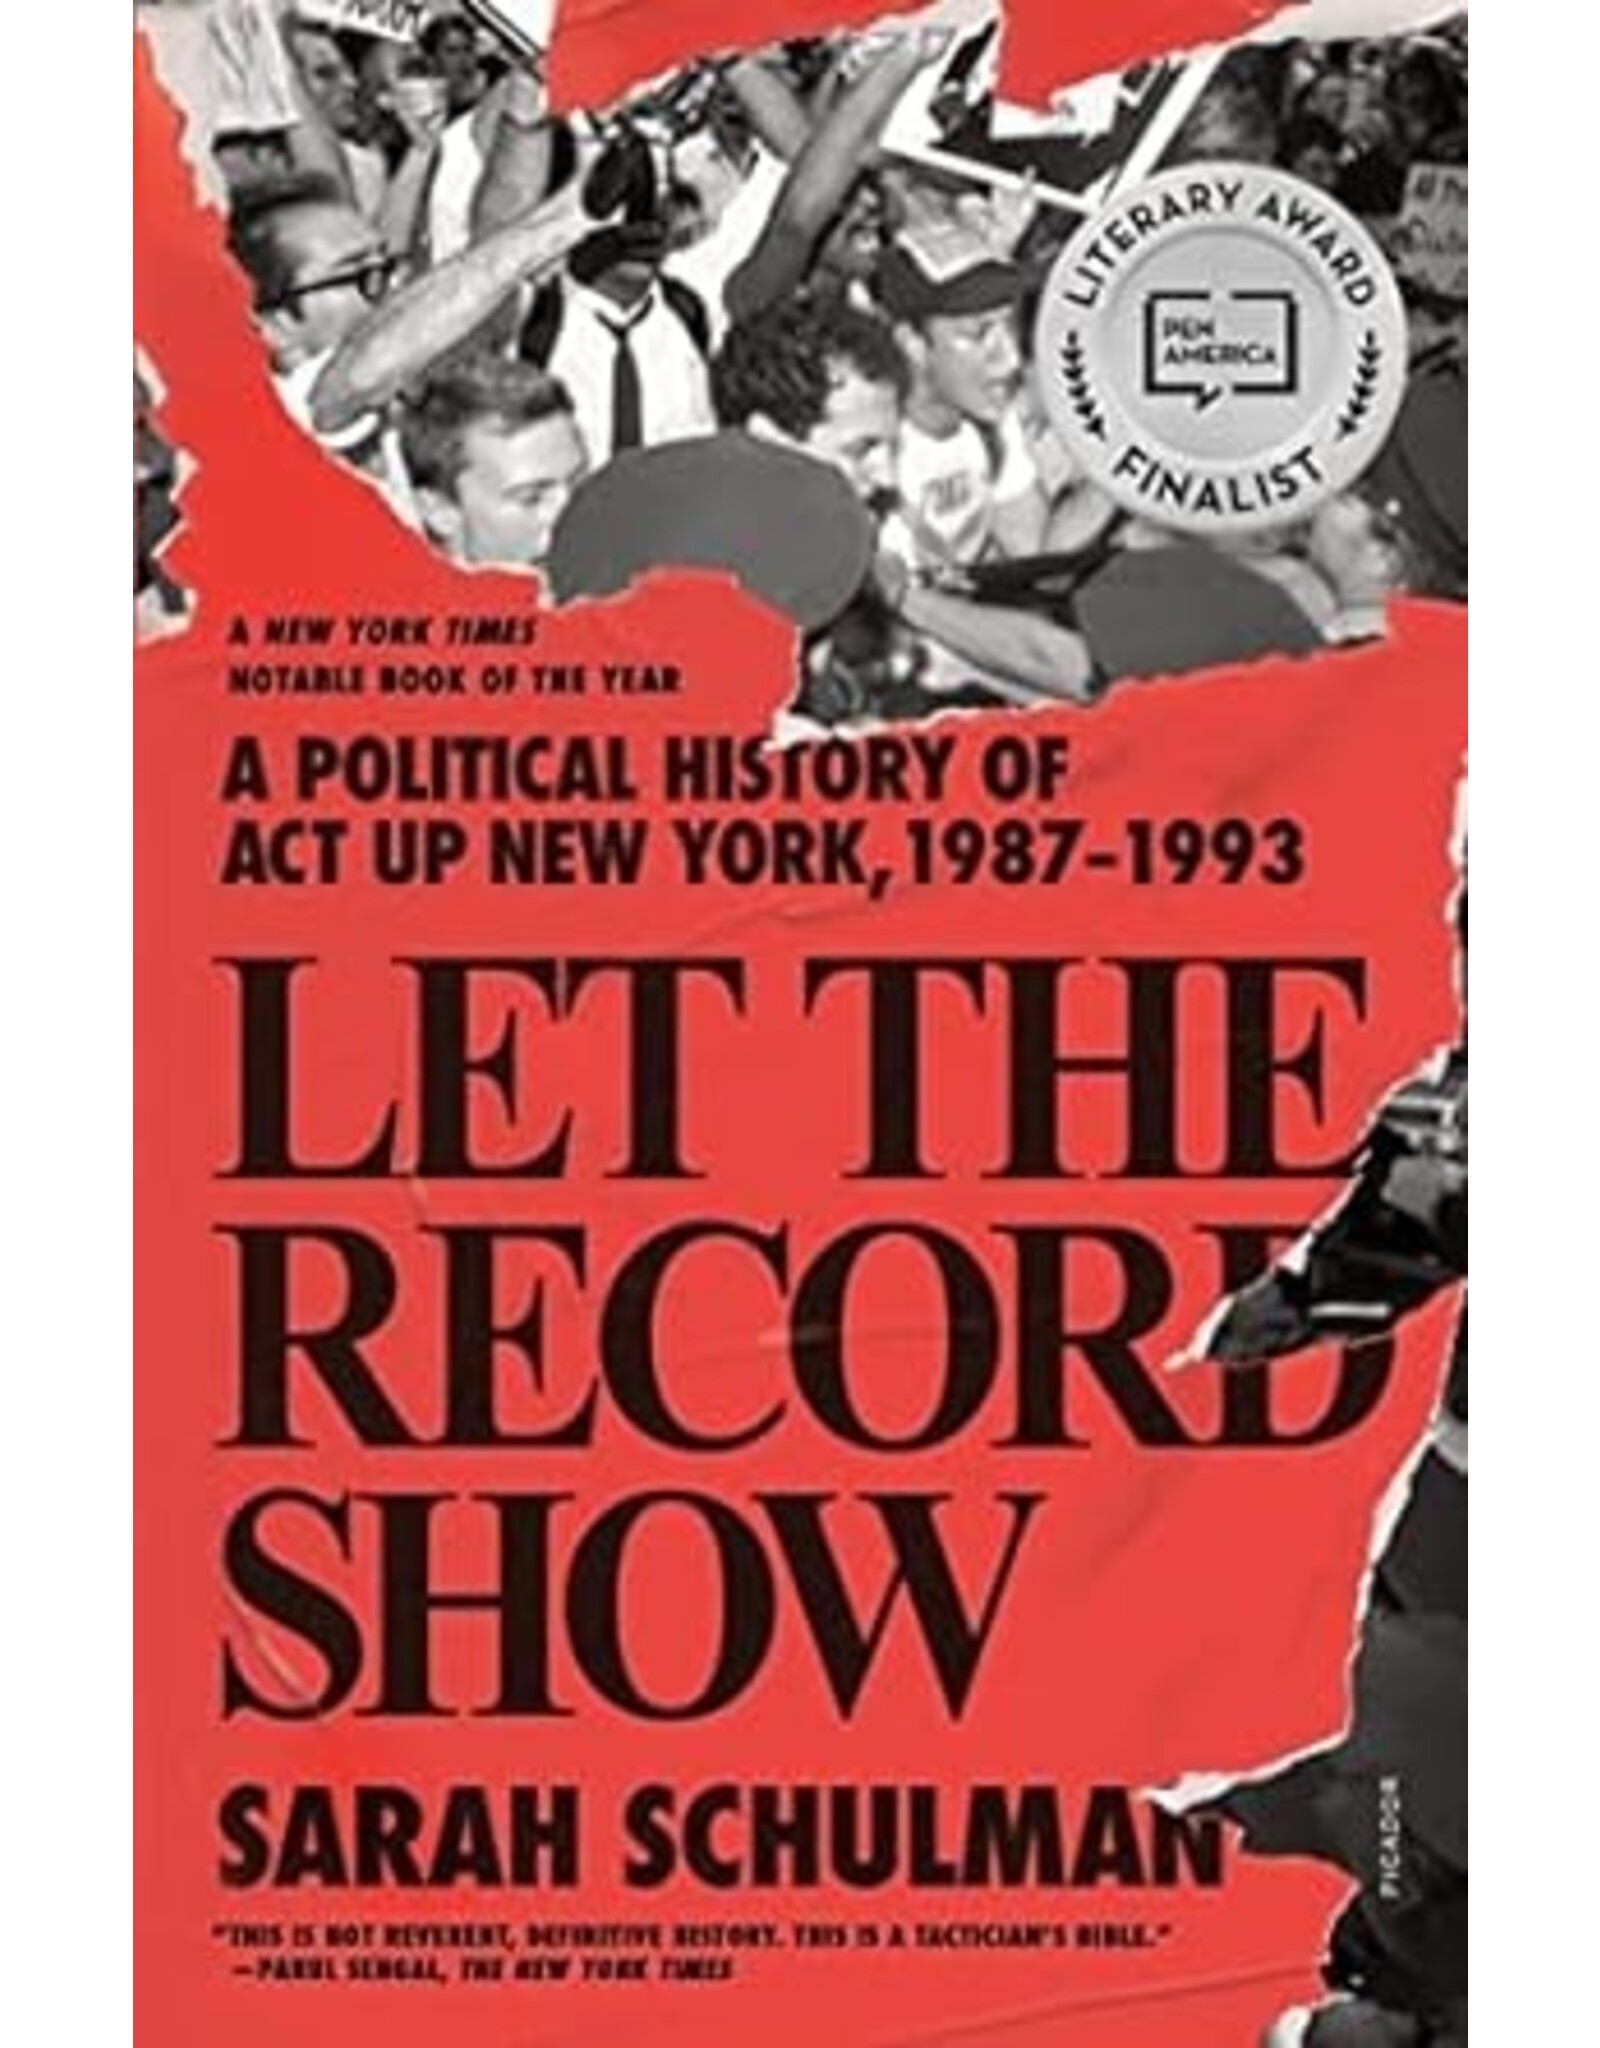 Let the Record Show: A Political History